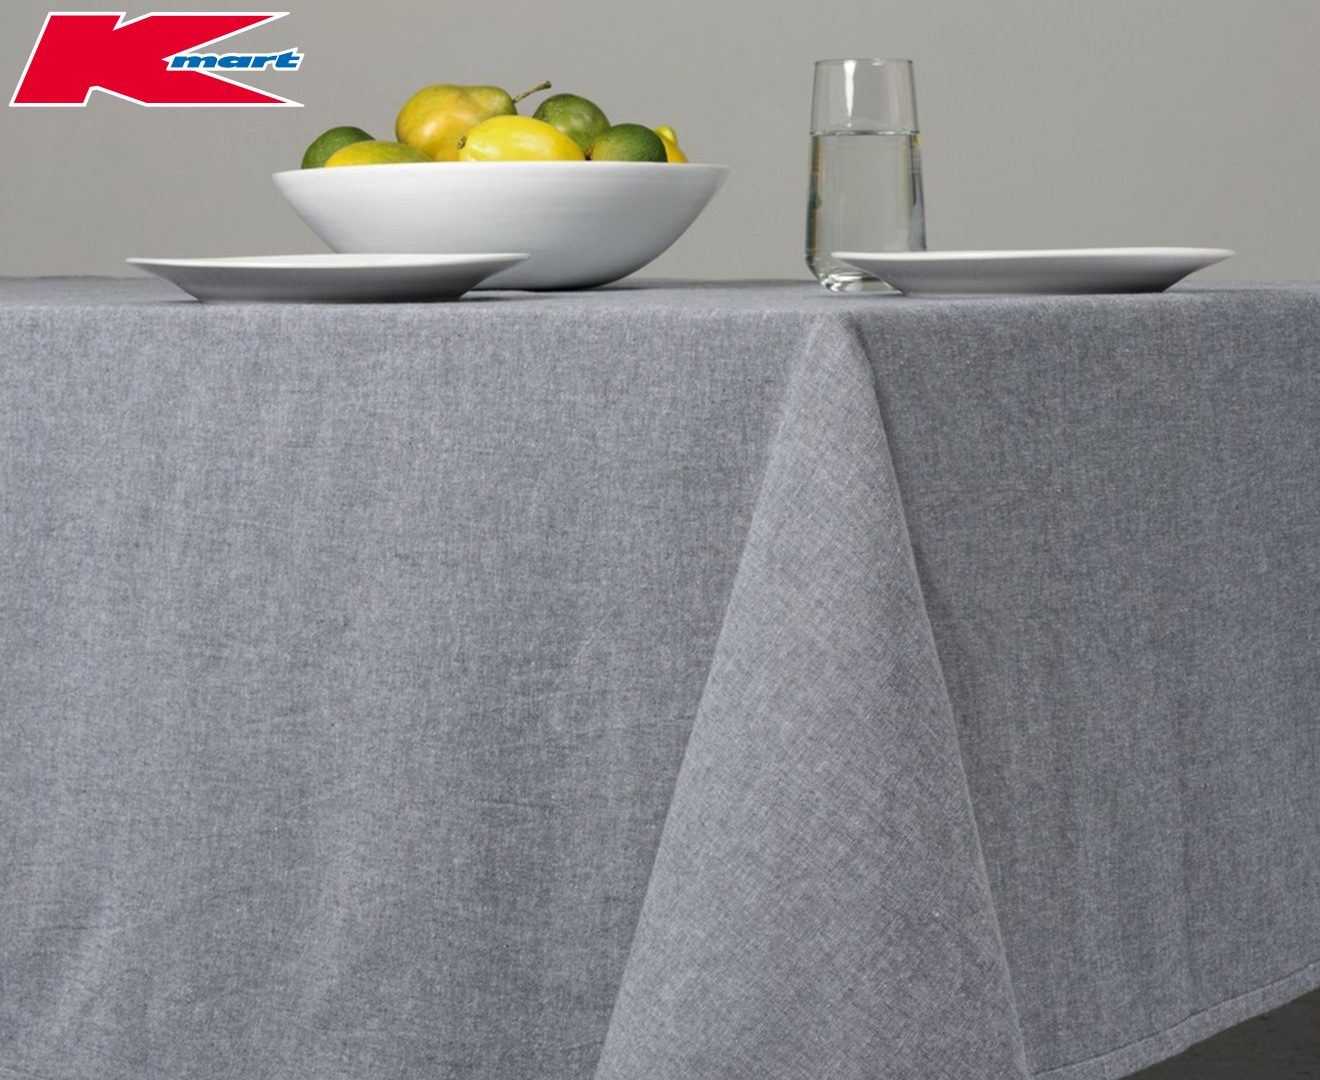 Anko by Kmart Linen-Look Table Cloth - Charcoal | Catch.com.au